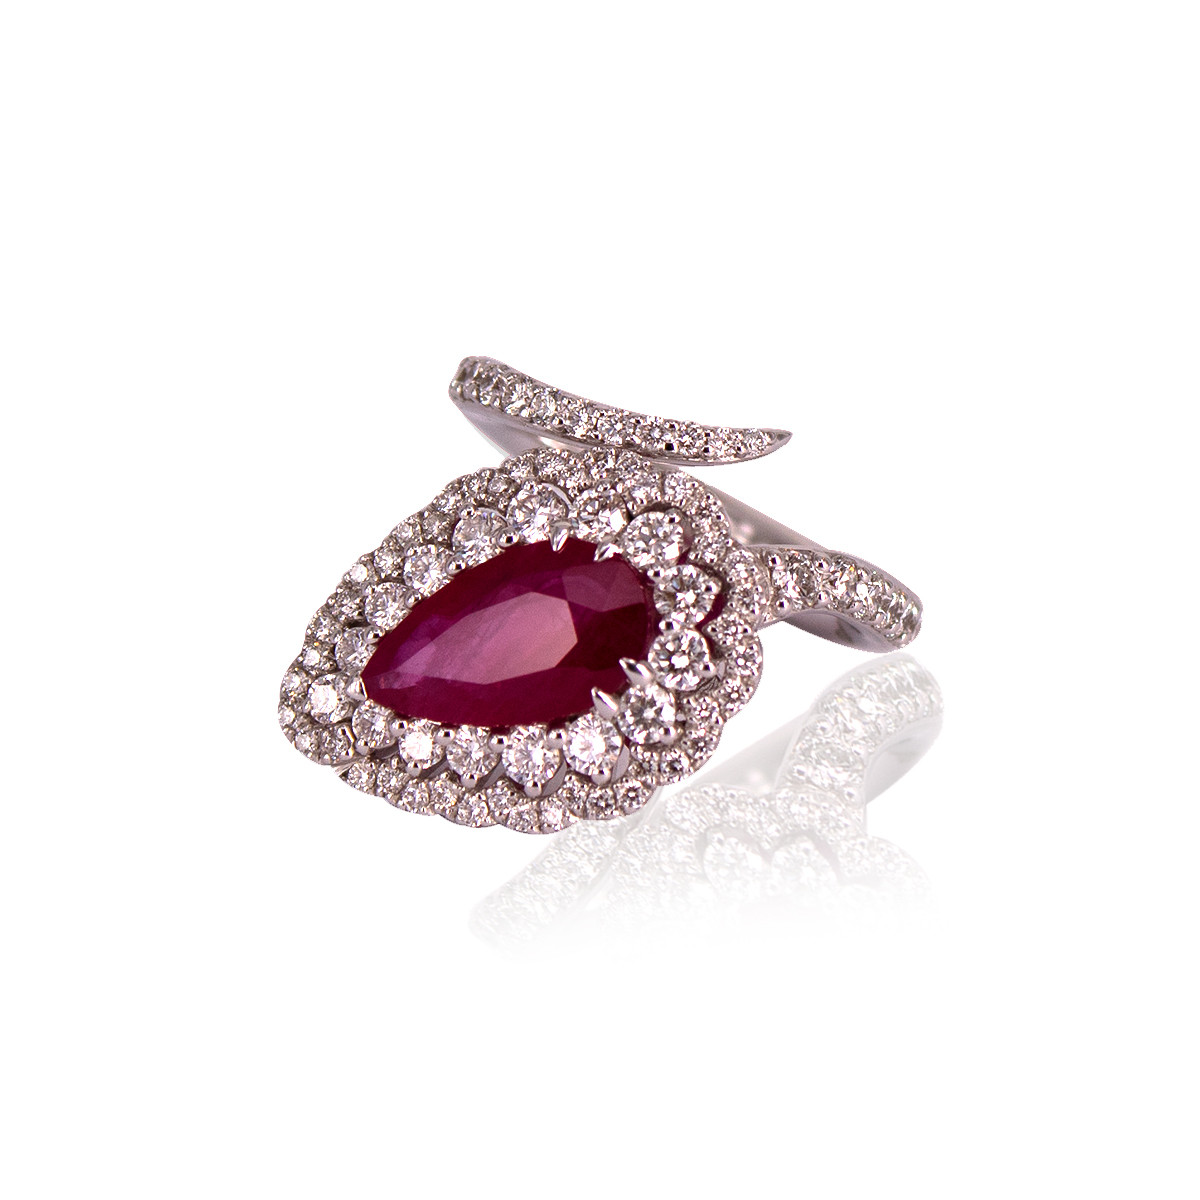 RING OF DIAMONDS AND RUBY